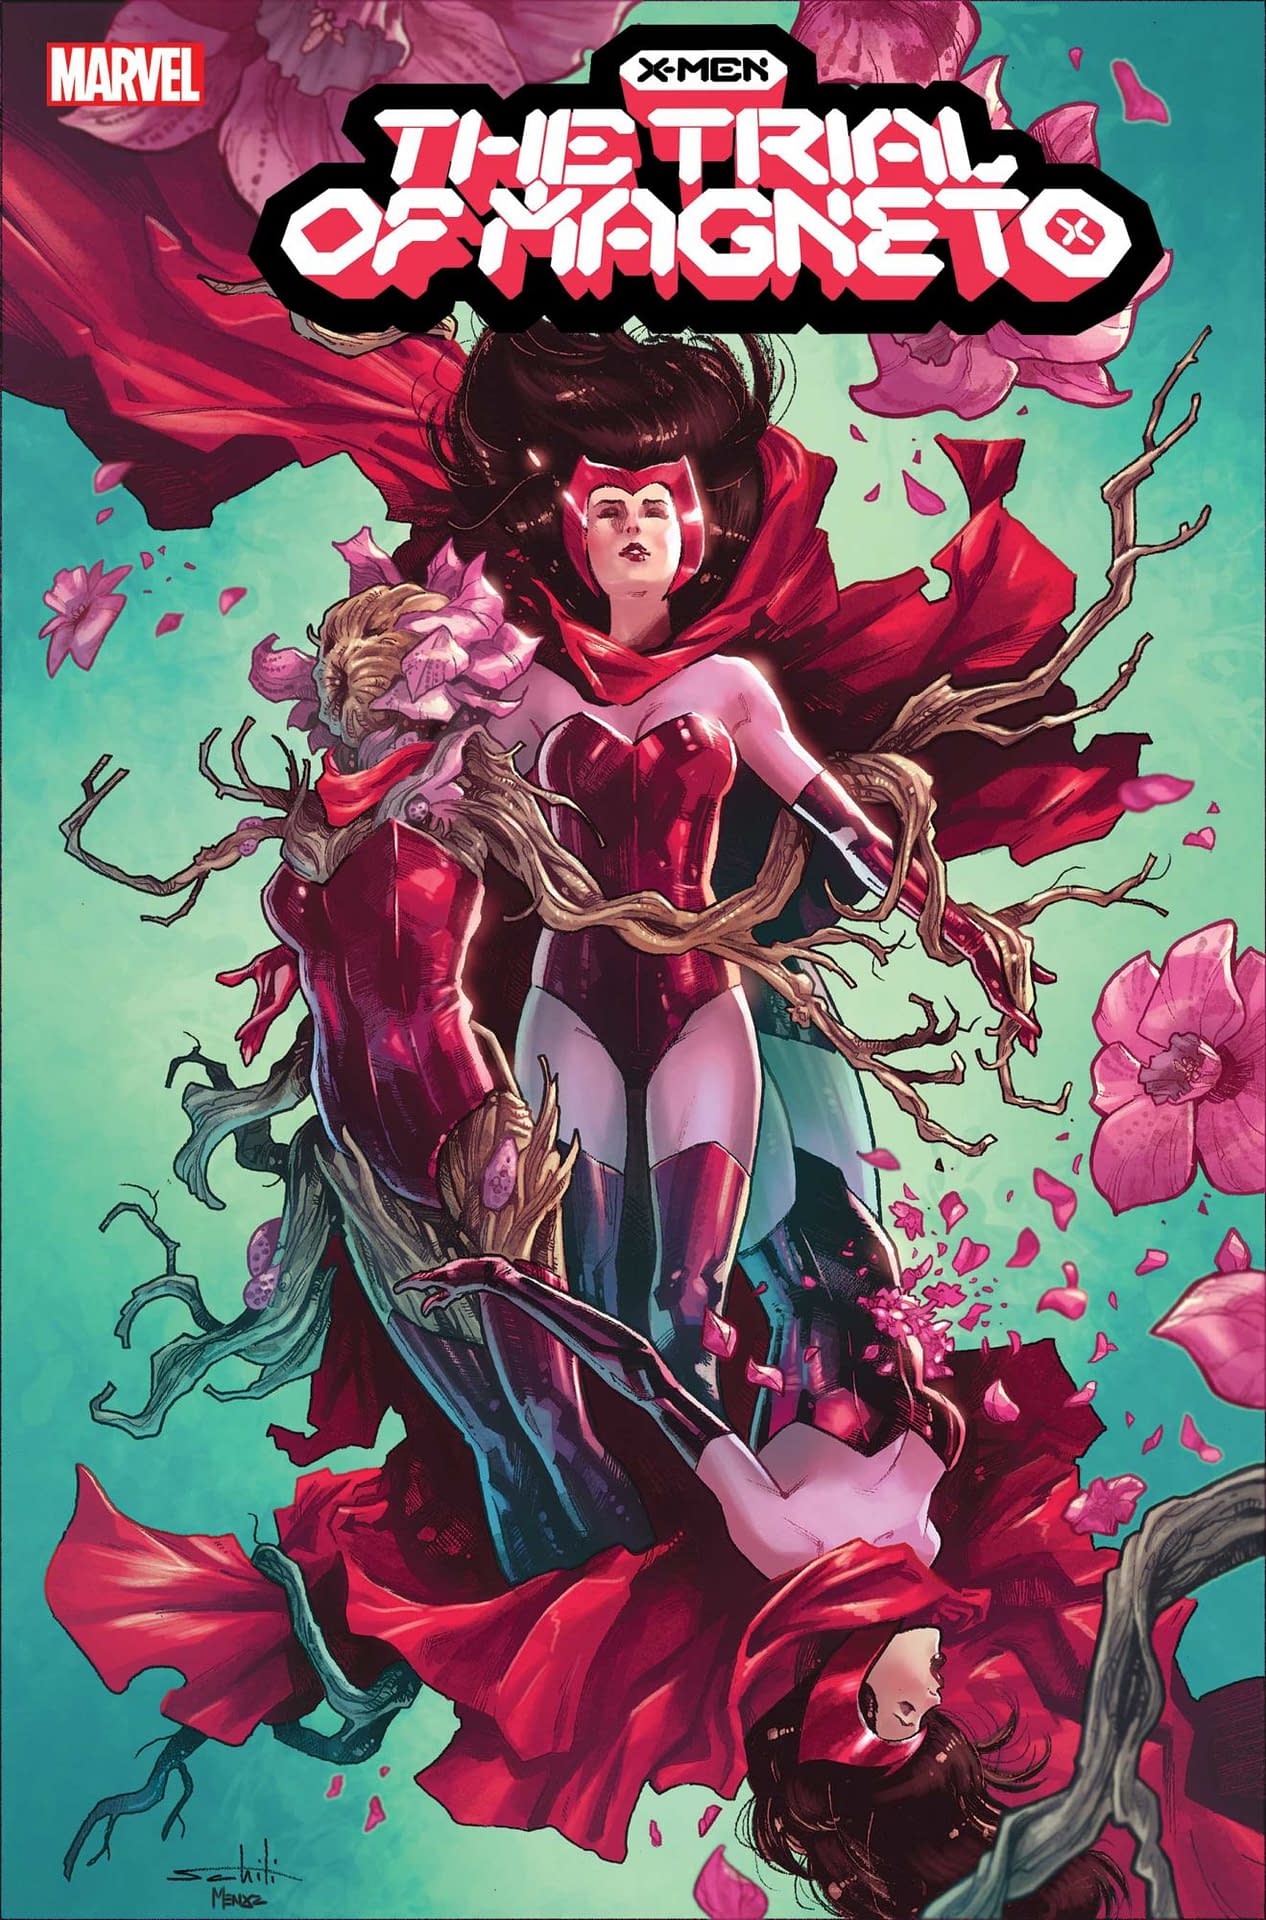 Wanda Maximoff Back To Life In The Trial Of Magneto #4?